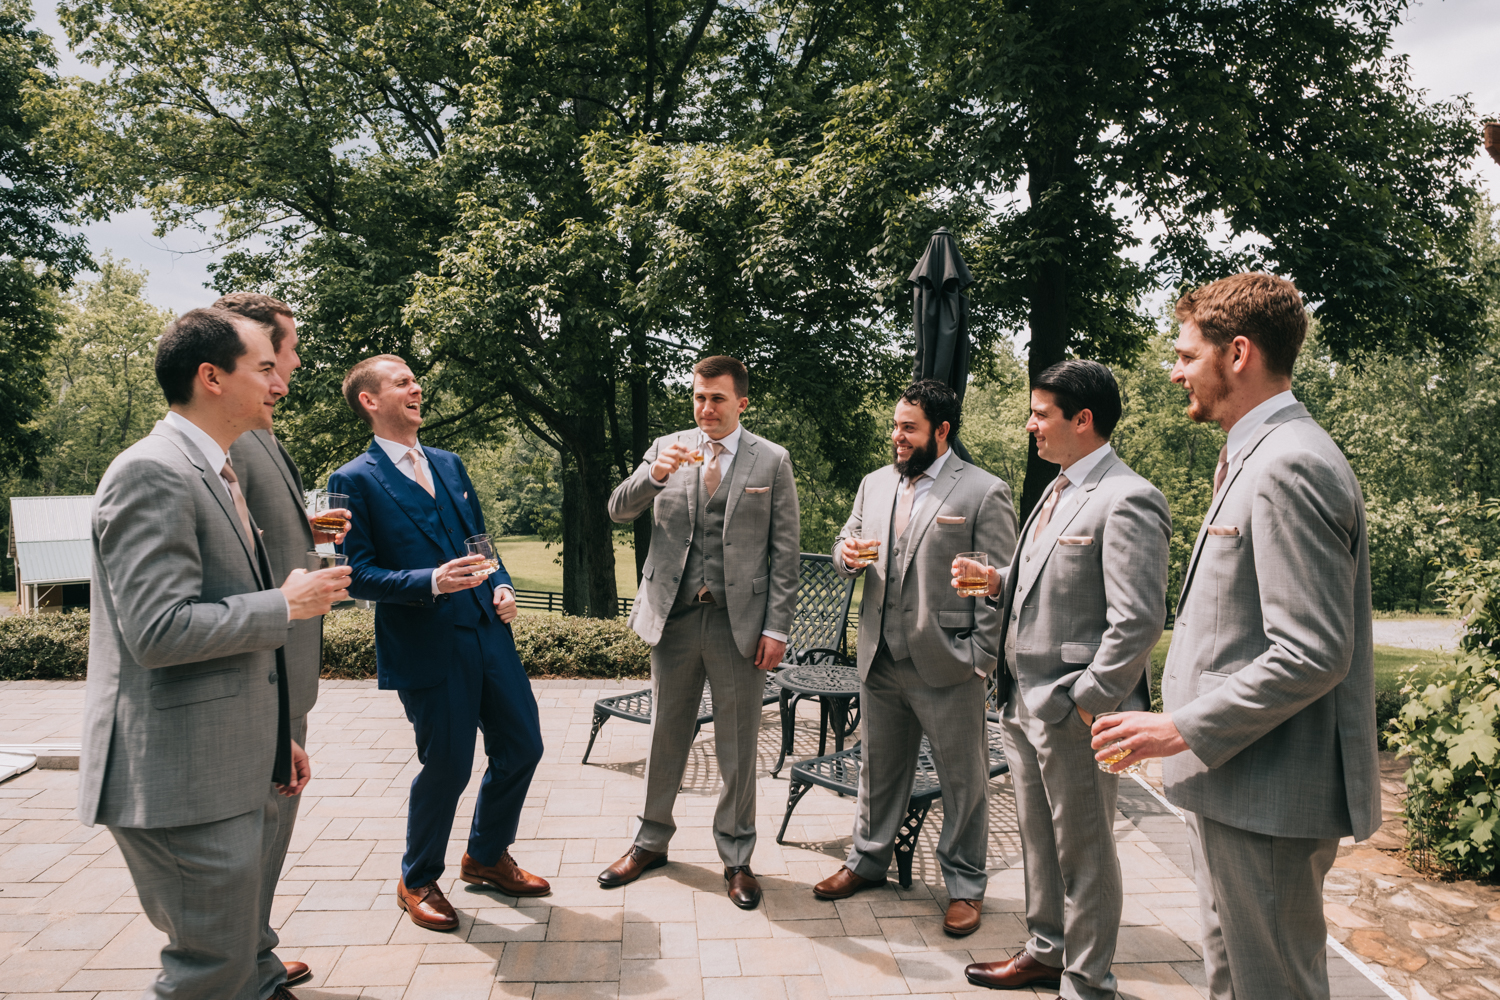 groomsmen getting ready bourbon and laughs